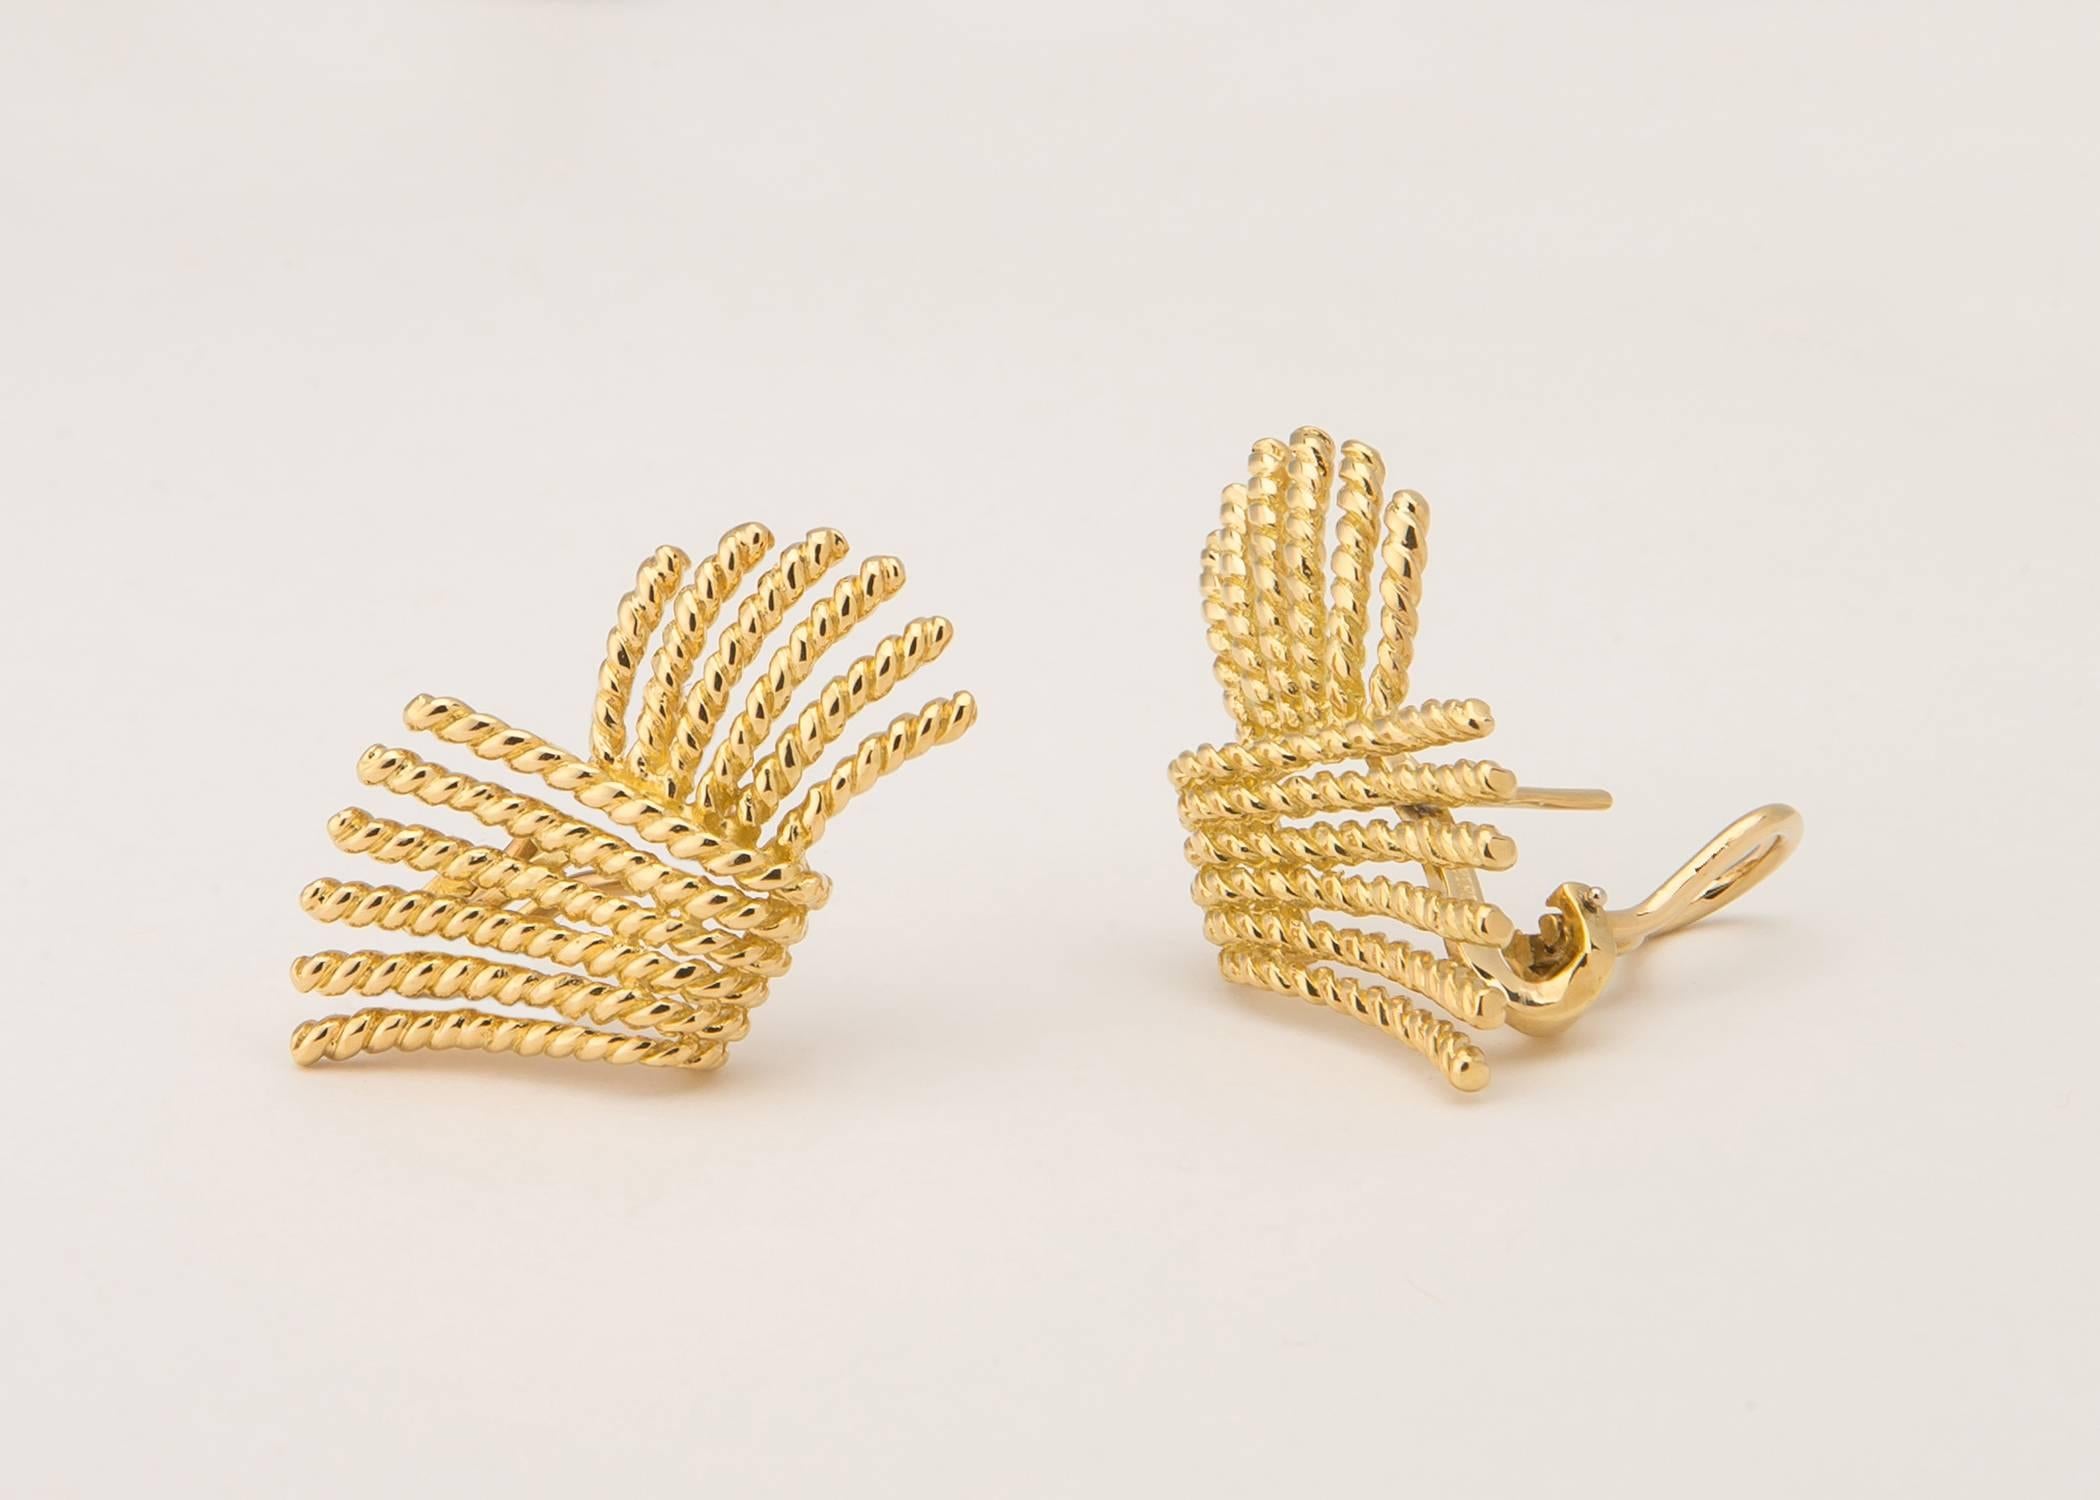 The acclaimed French jewelry designer Jean Schlumberger joined Tiffany & Co. in the 1950's  His creations are considered works of art and in some of the finest collections. His gold rope earring offers a wearable shape and wonderful fit. 1 1/4